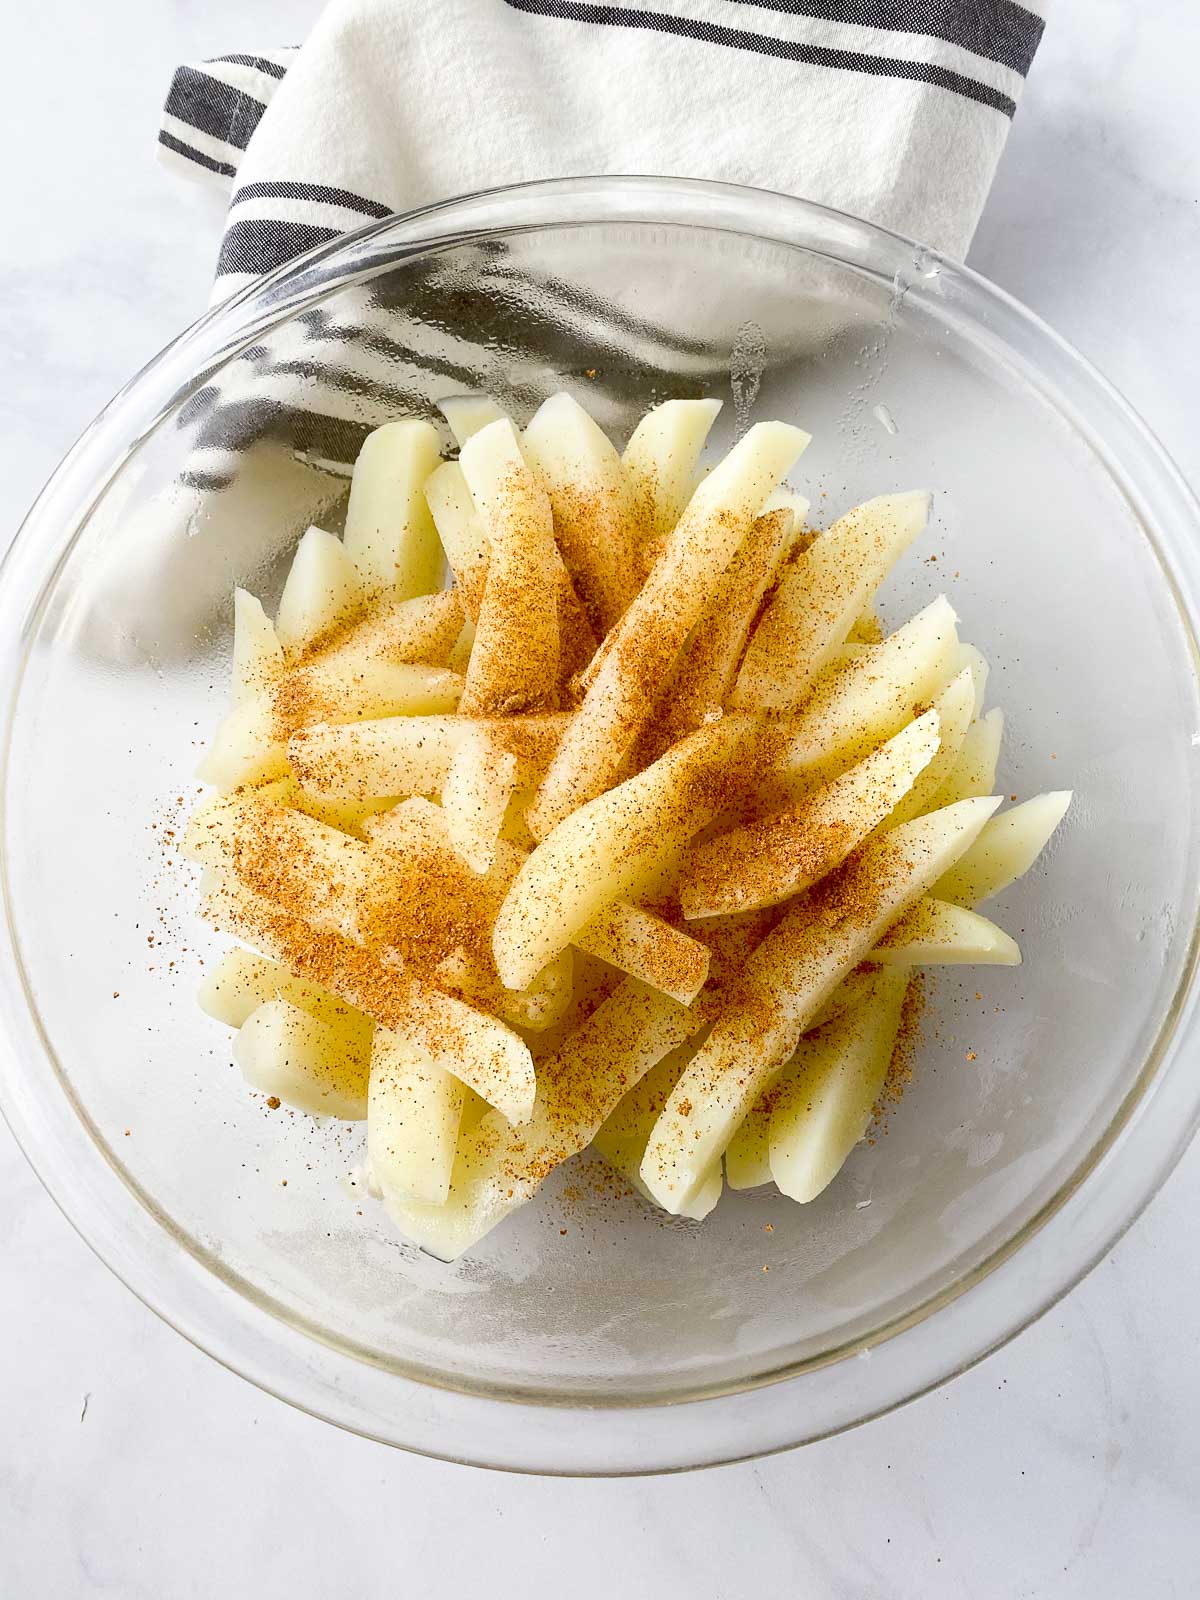 Sliced potatoes and seasoning in glass mixing bowl